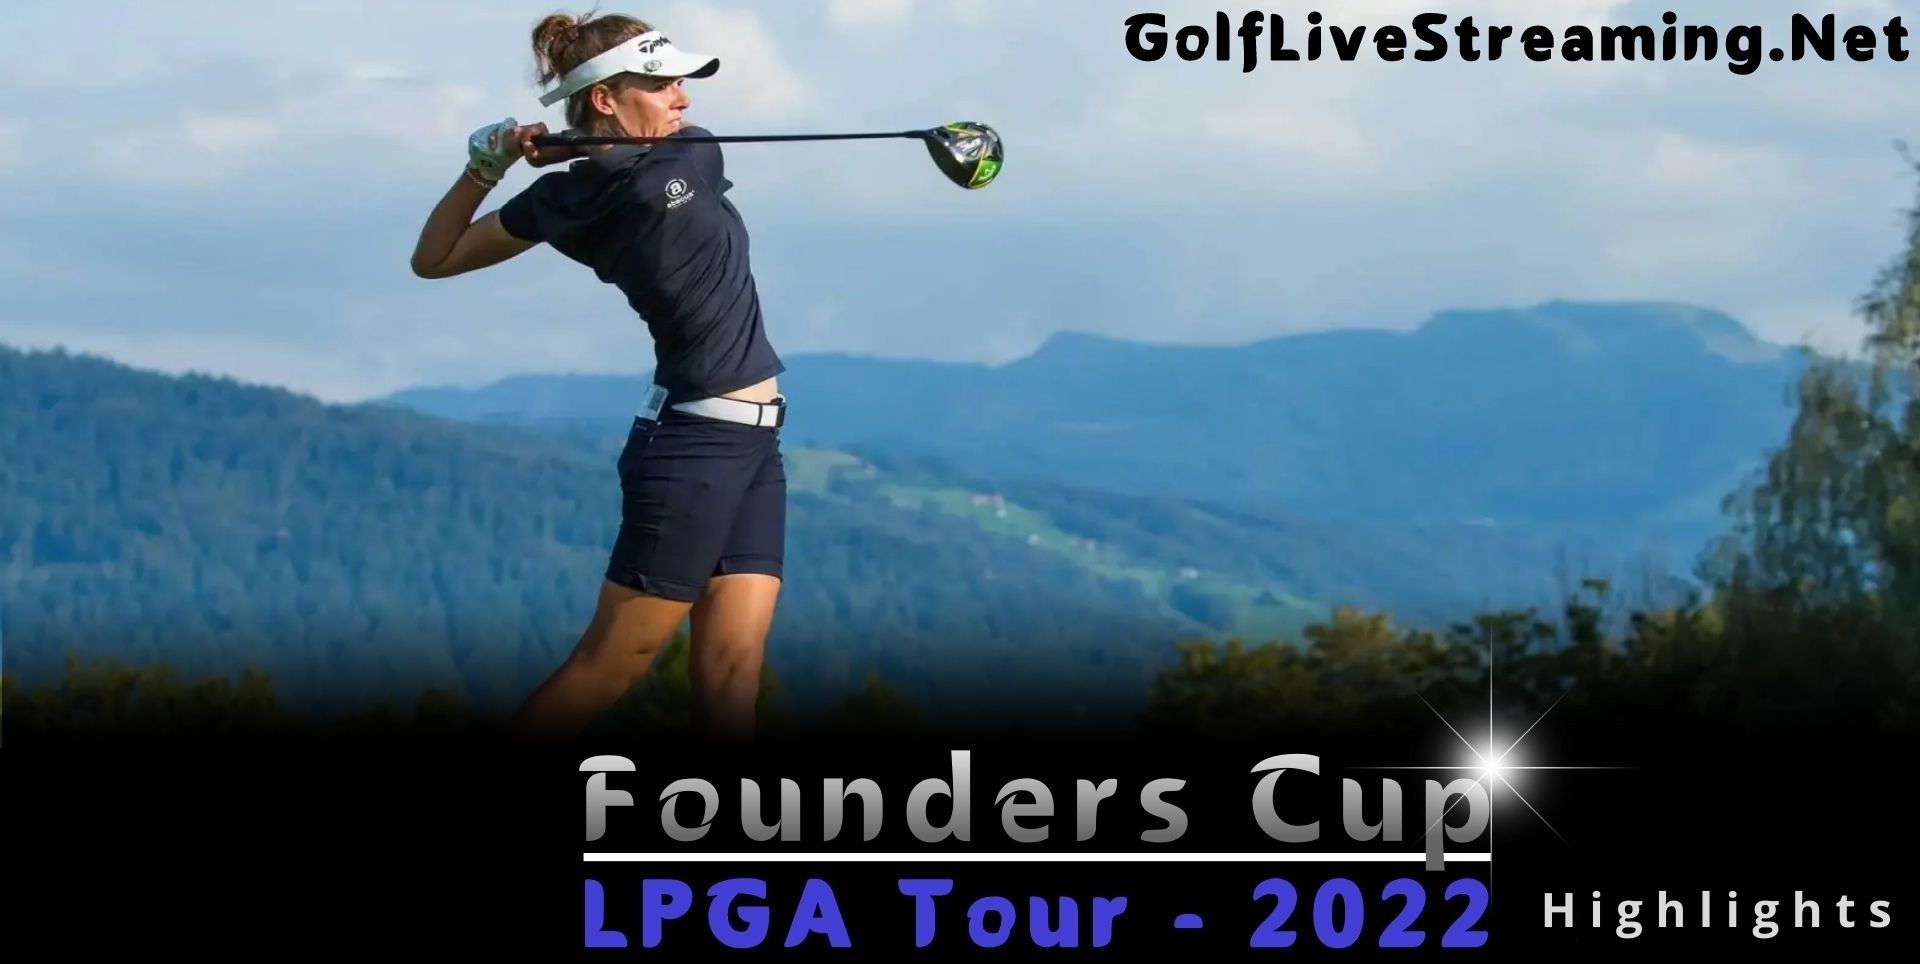 Founders Cup Round 3 Highlights 2022 LPGA Tour